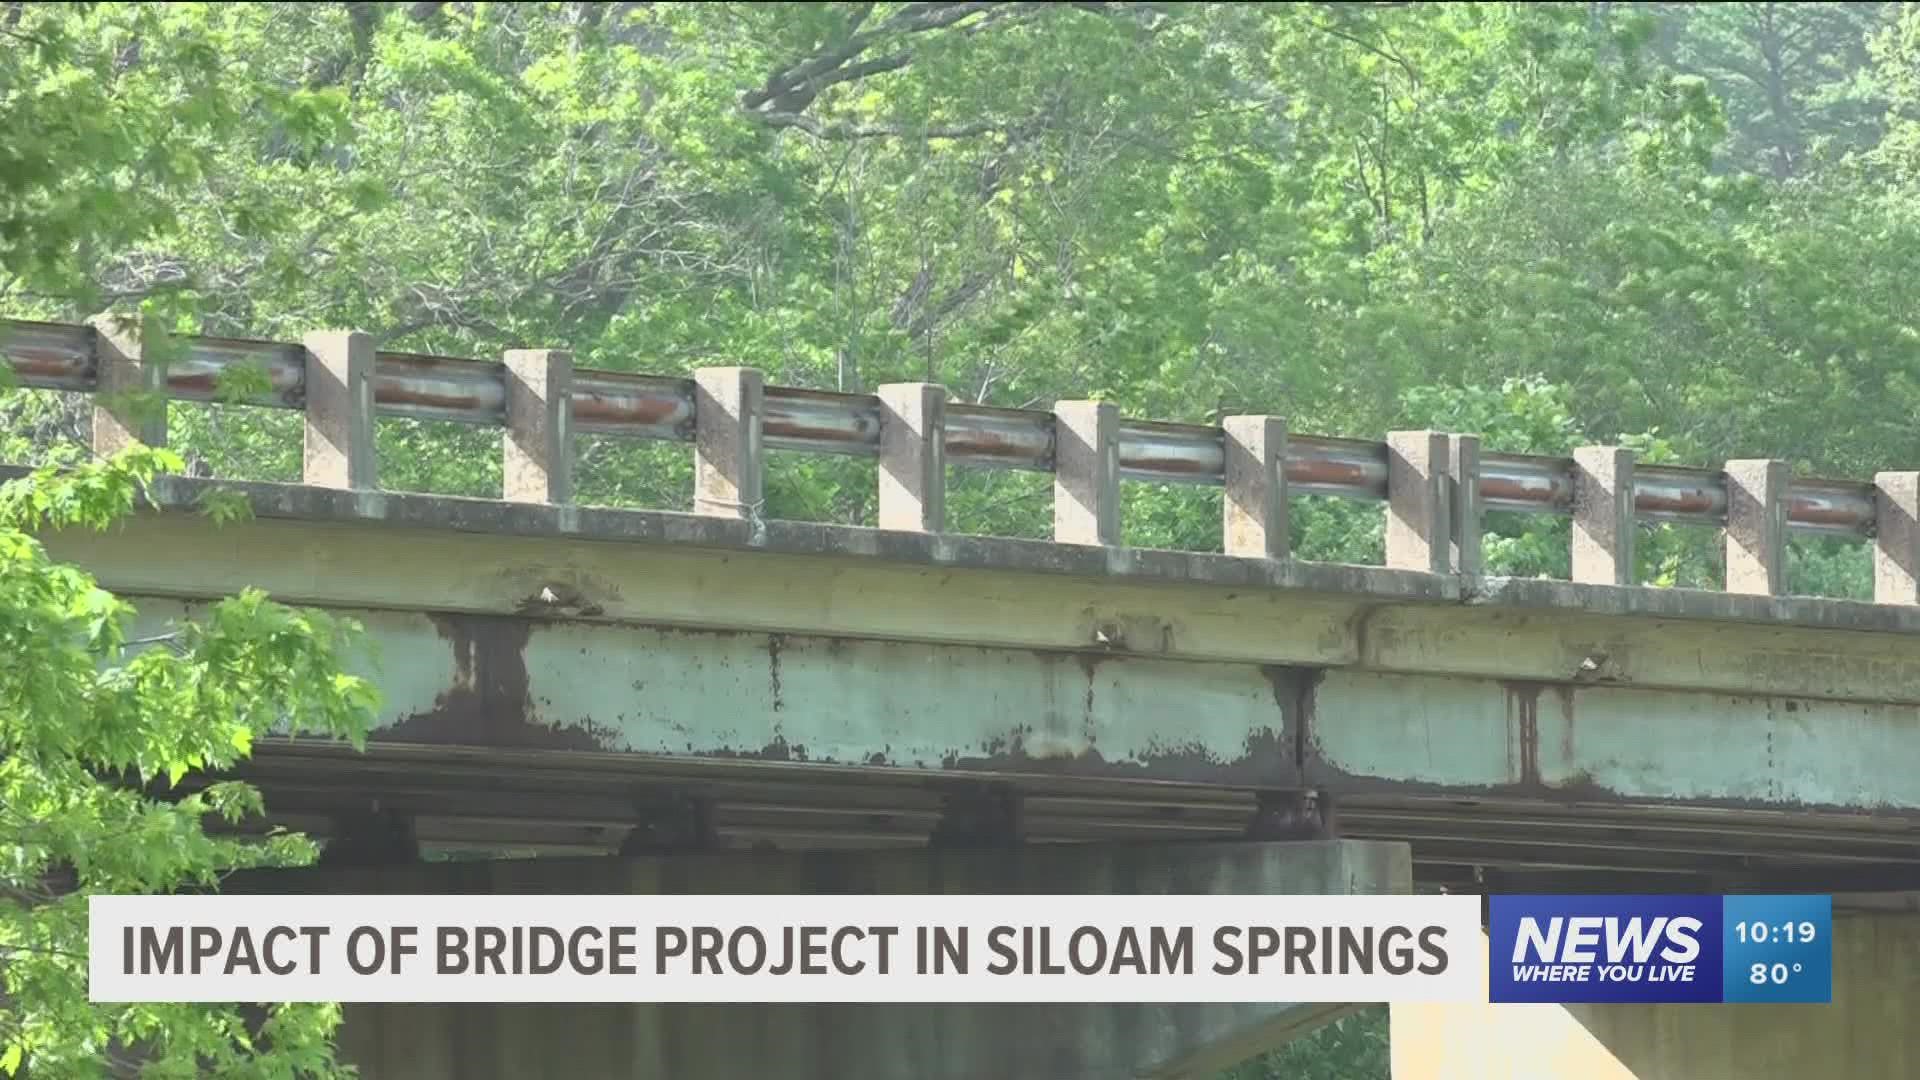 Some Siloam Springs residents and business owners say they fear improvements and additions to the Illinois River Bridge on Highway 59.